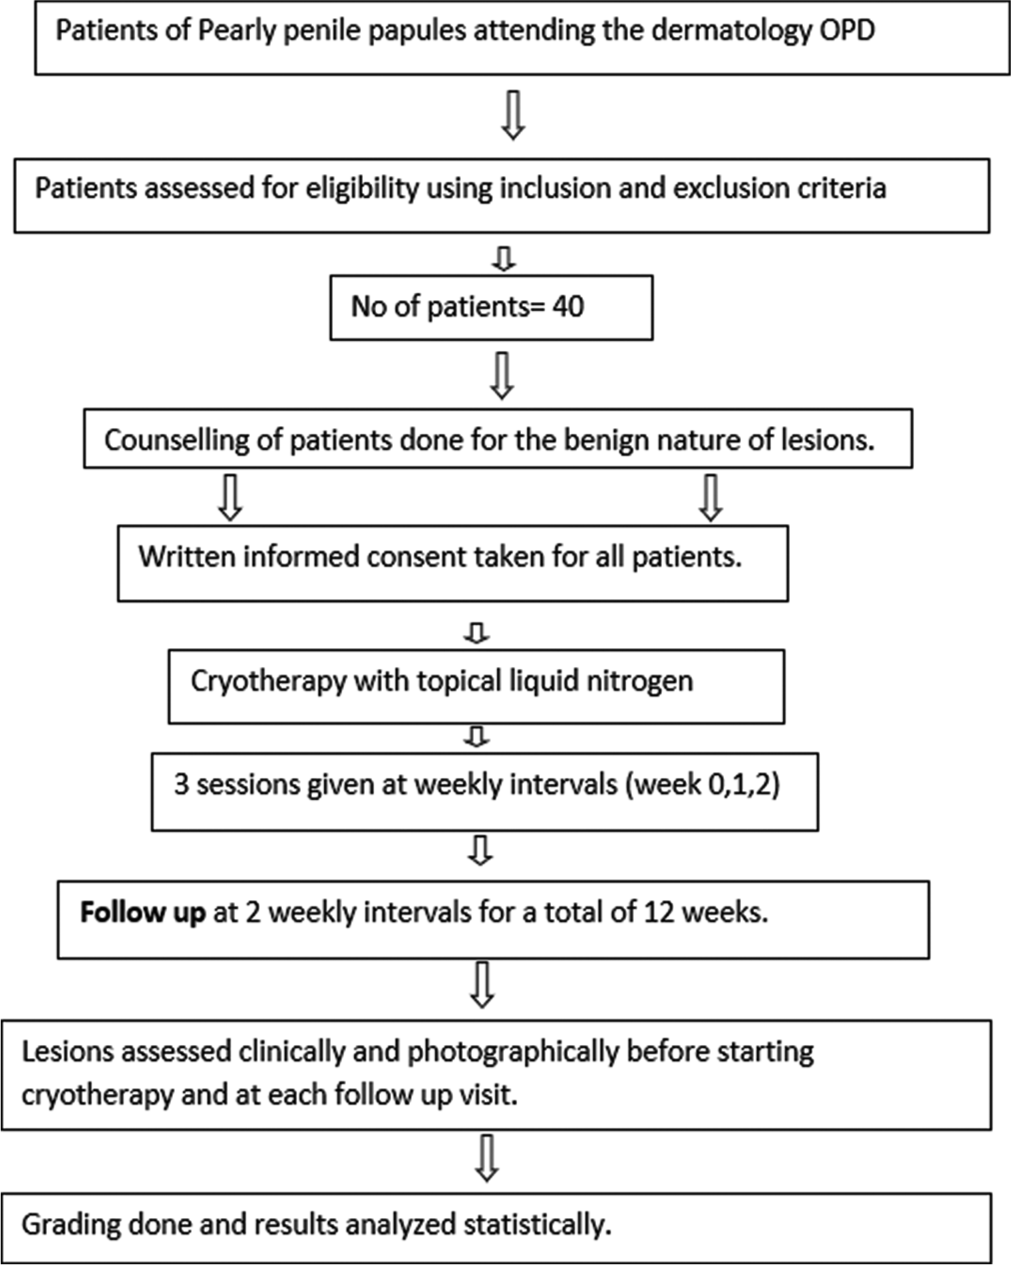 Therapeutic efficacy of topical liquid nitrogen cryotherapy in pearly penile papules